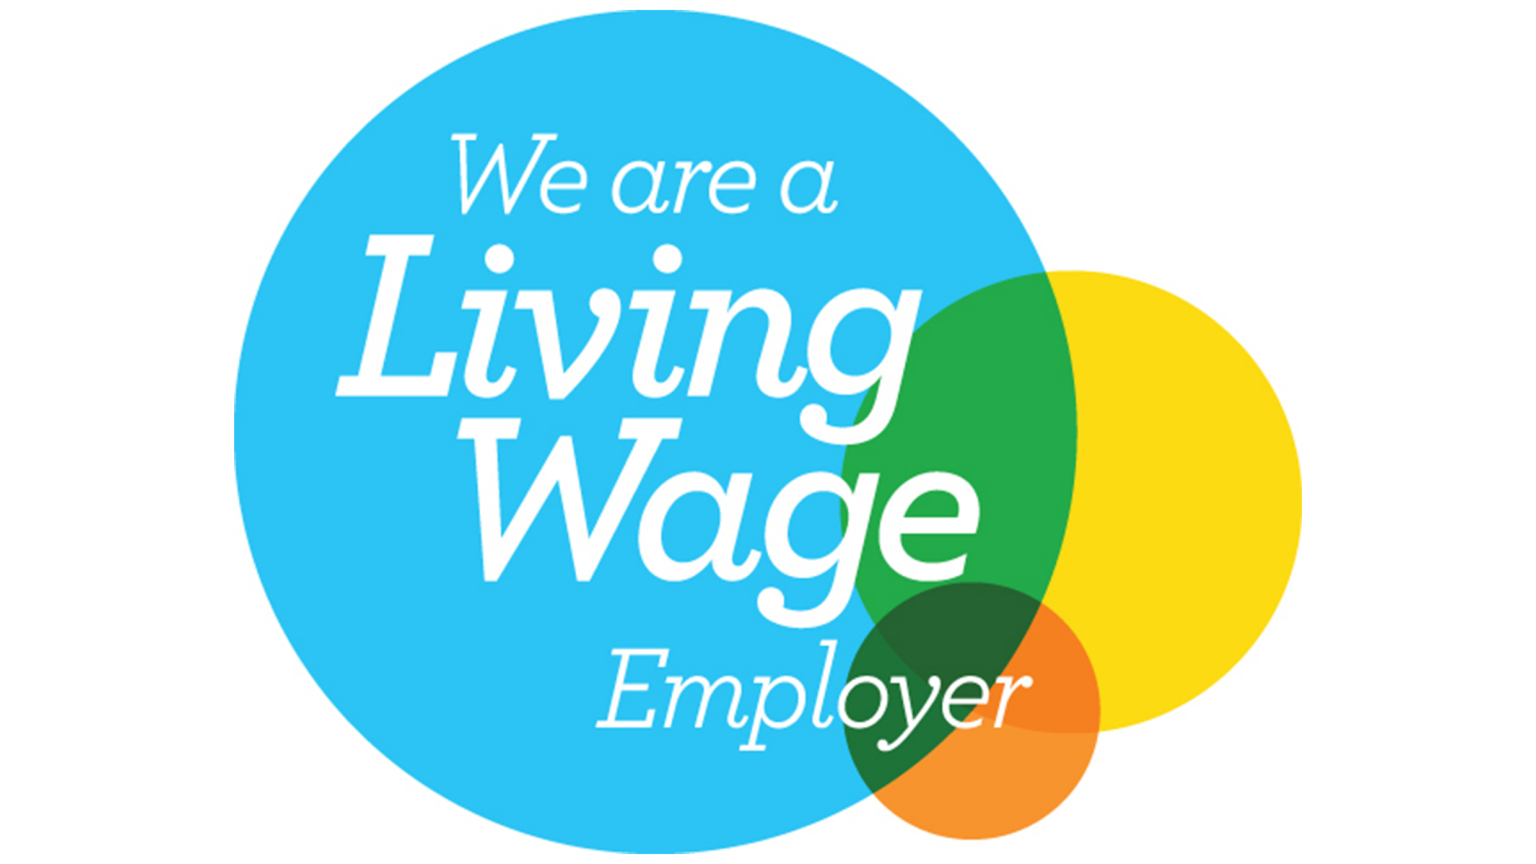 real-living-wage